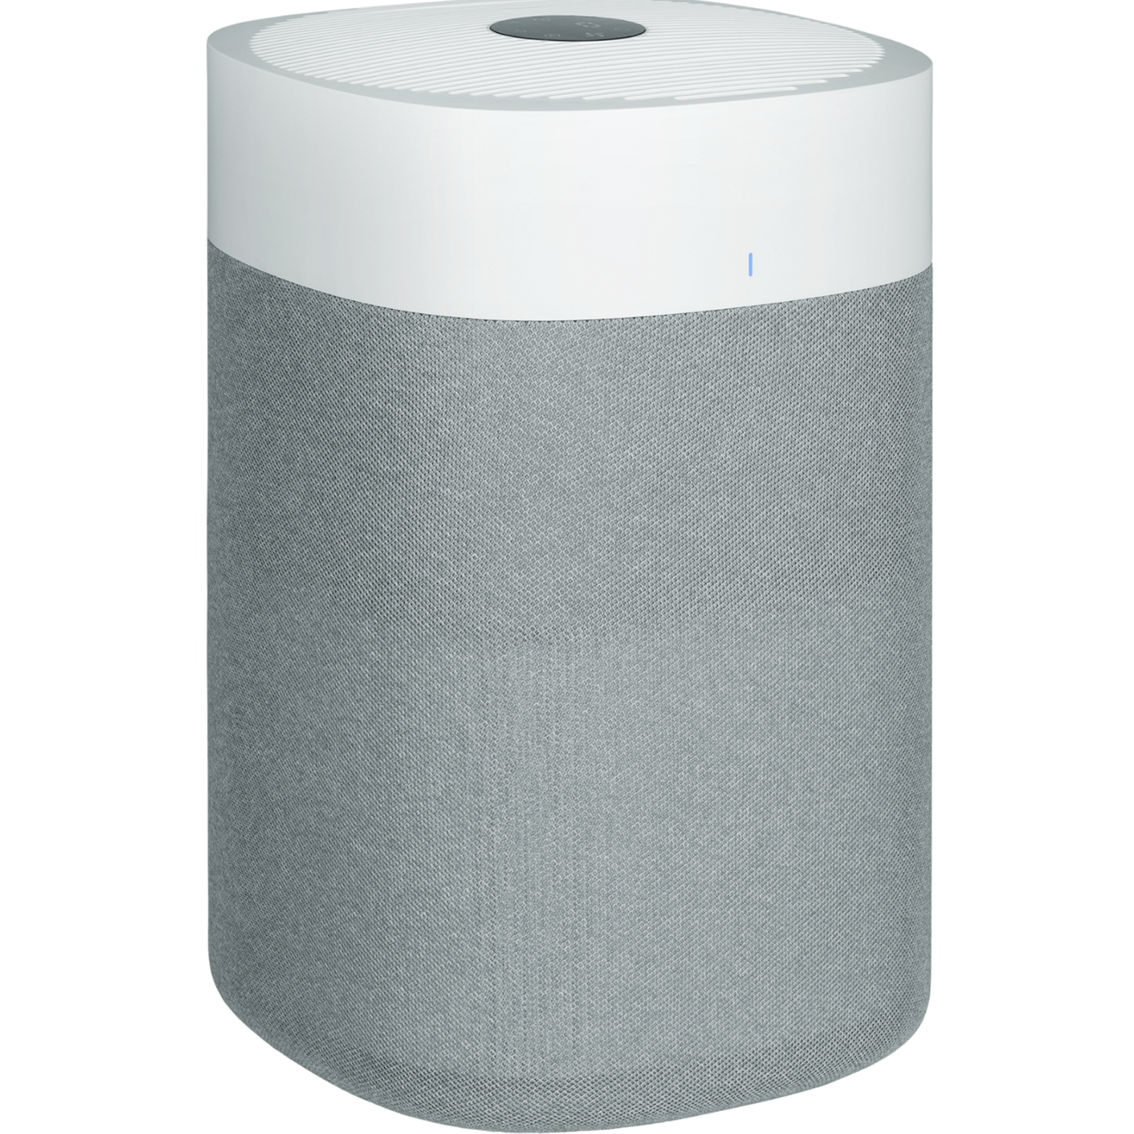 Blueair 211i Max Air Purifier with Bluetooth - Image 2 of 7